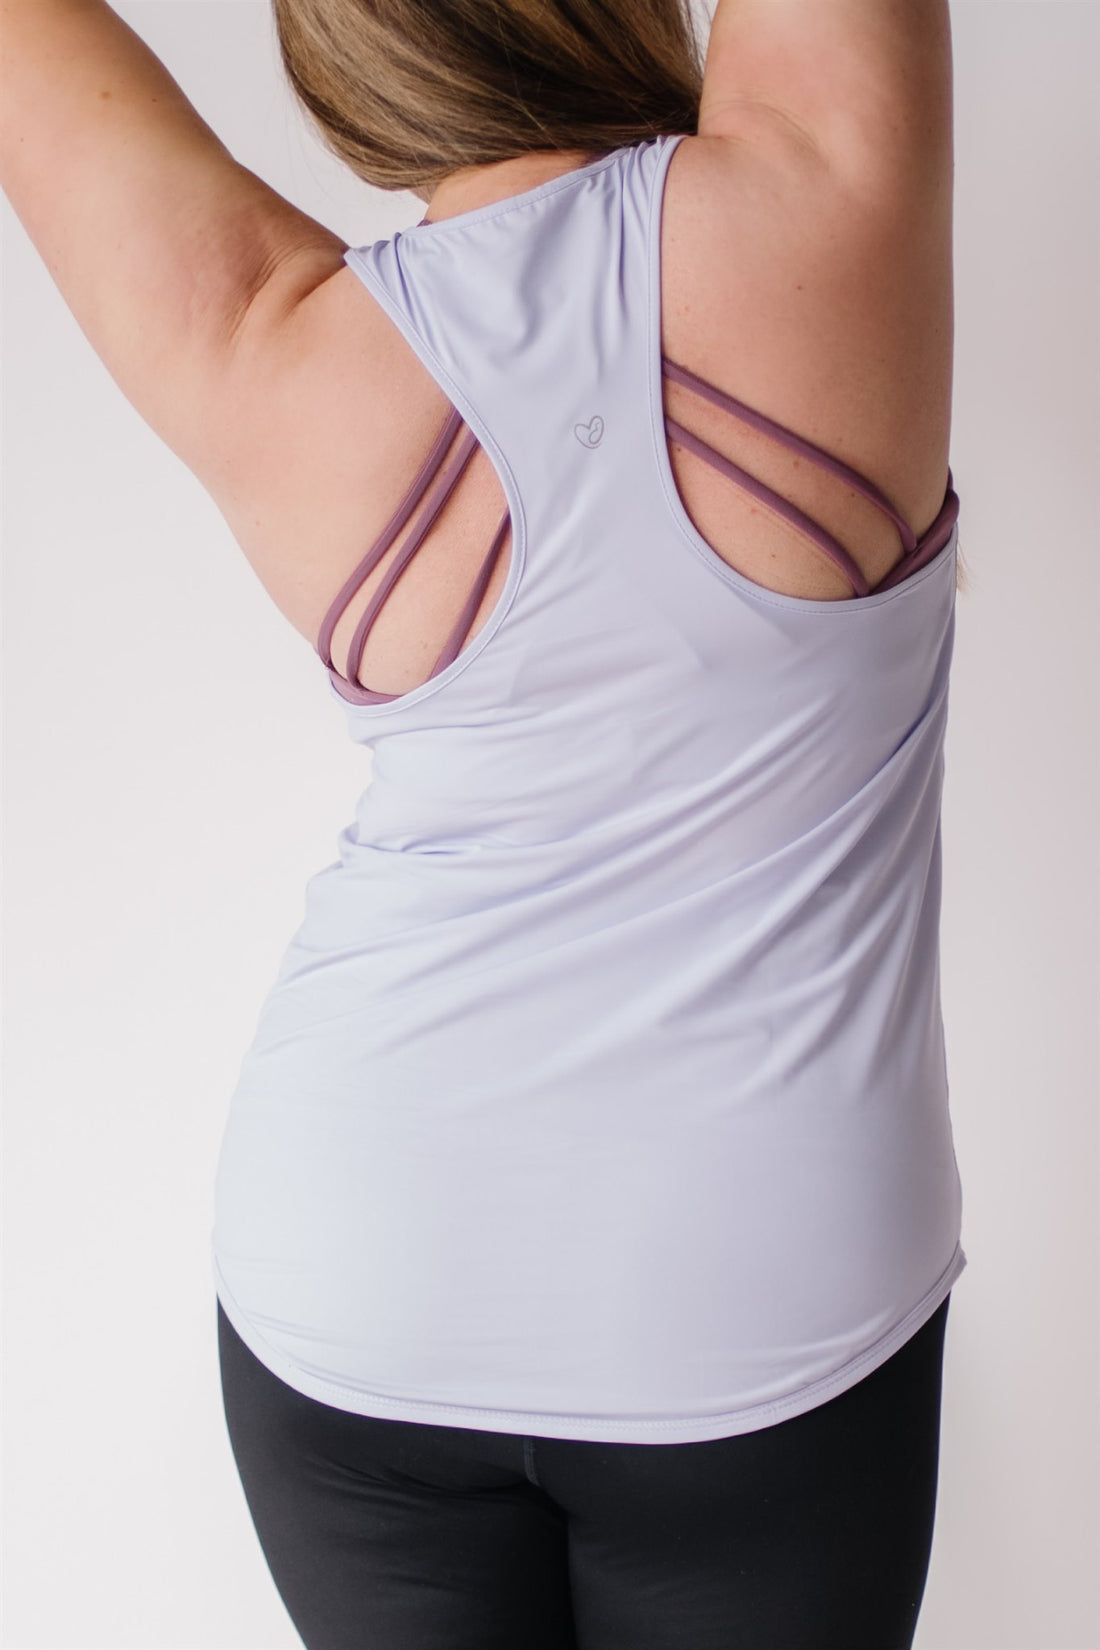 Woman wearing long maternity and nursing workout tank top in lavender.